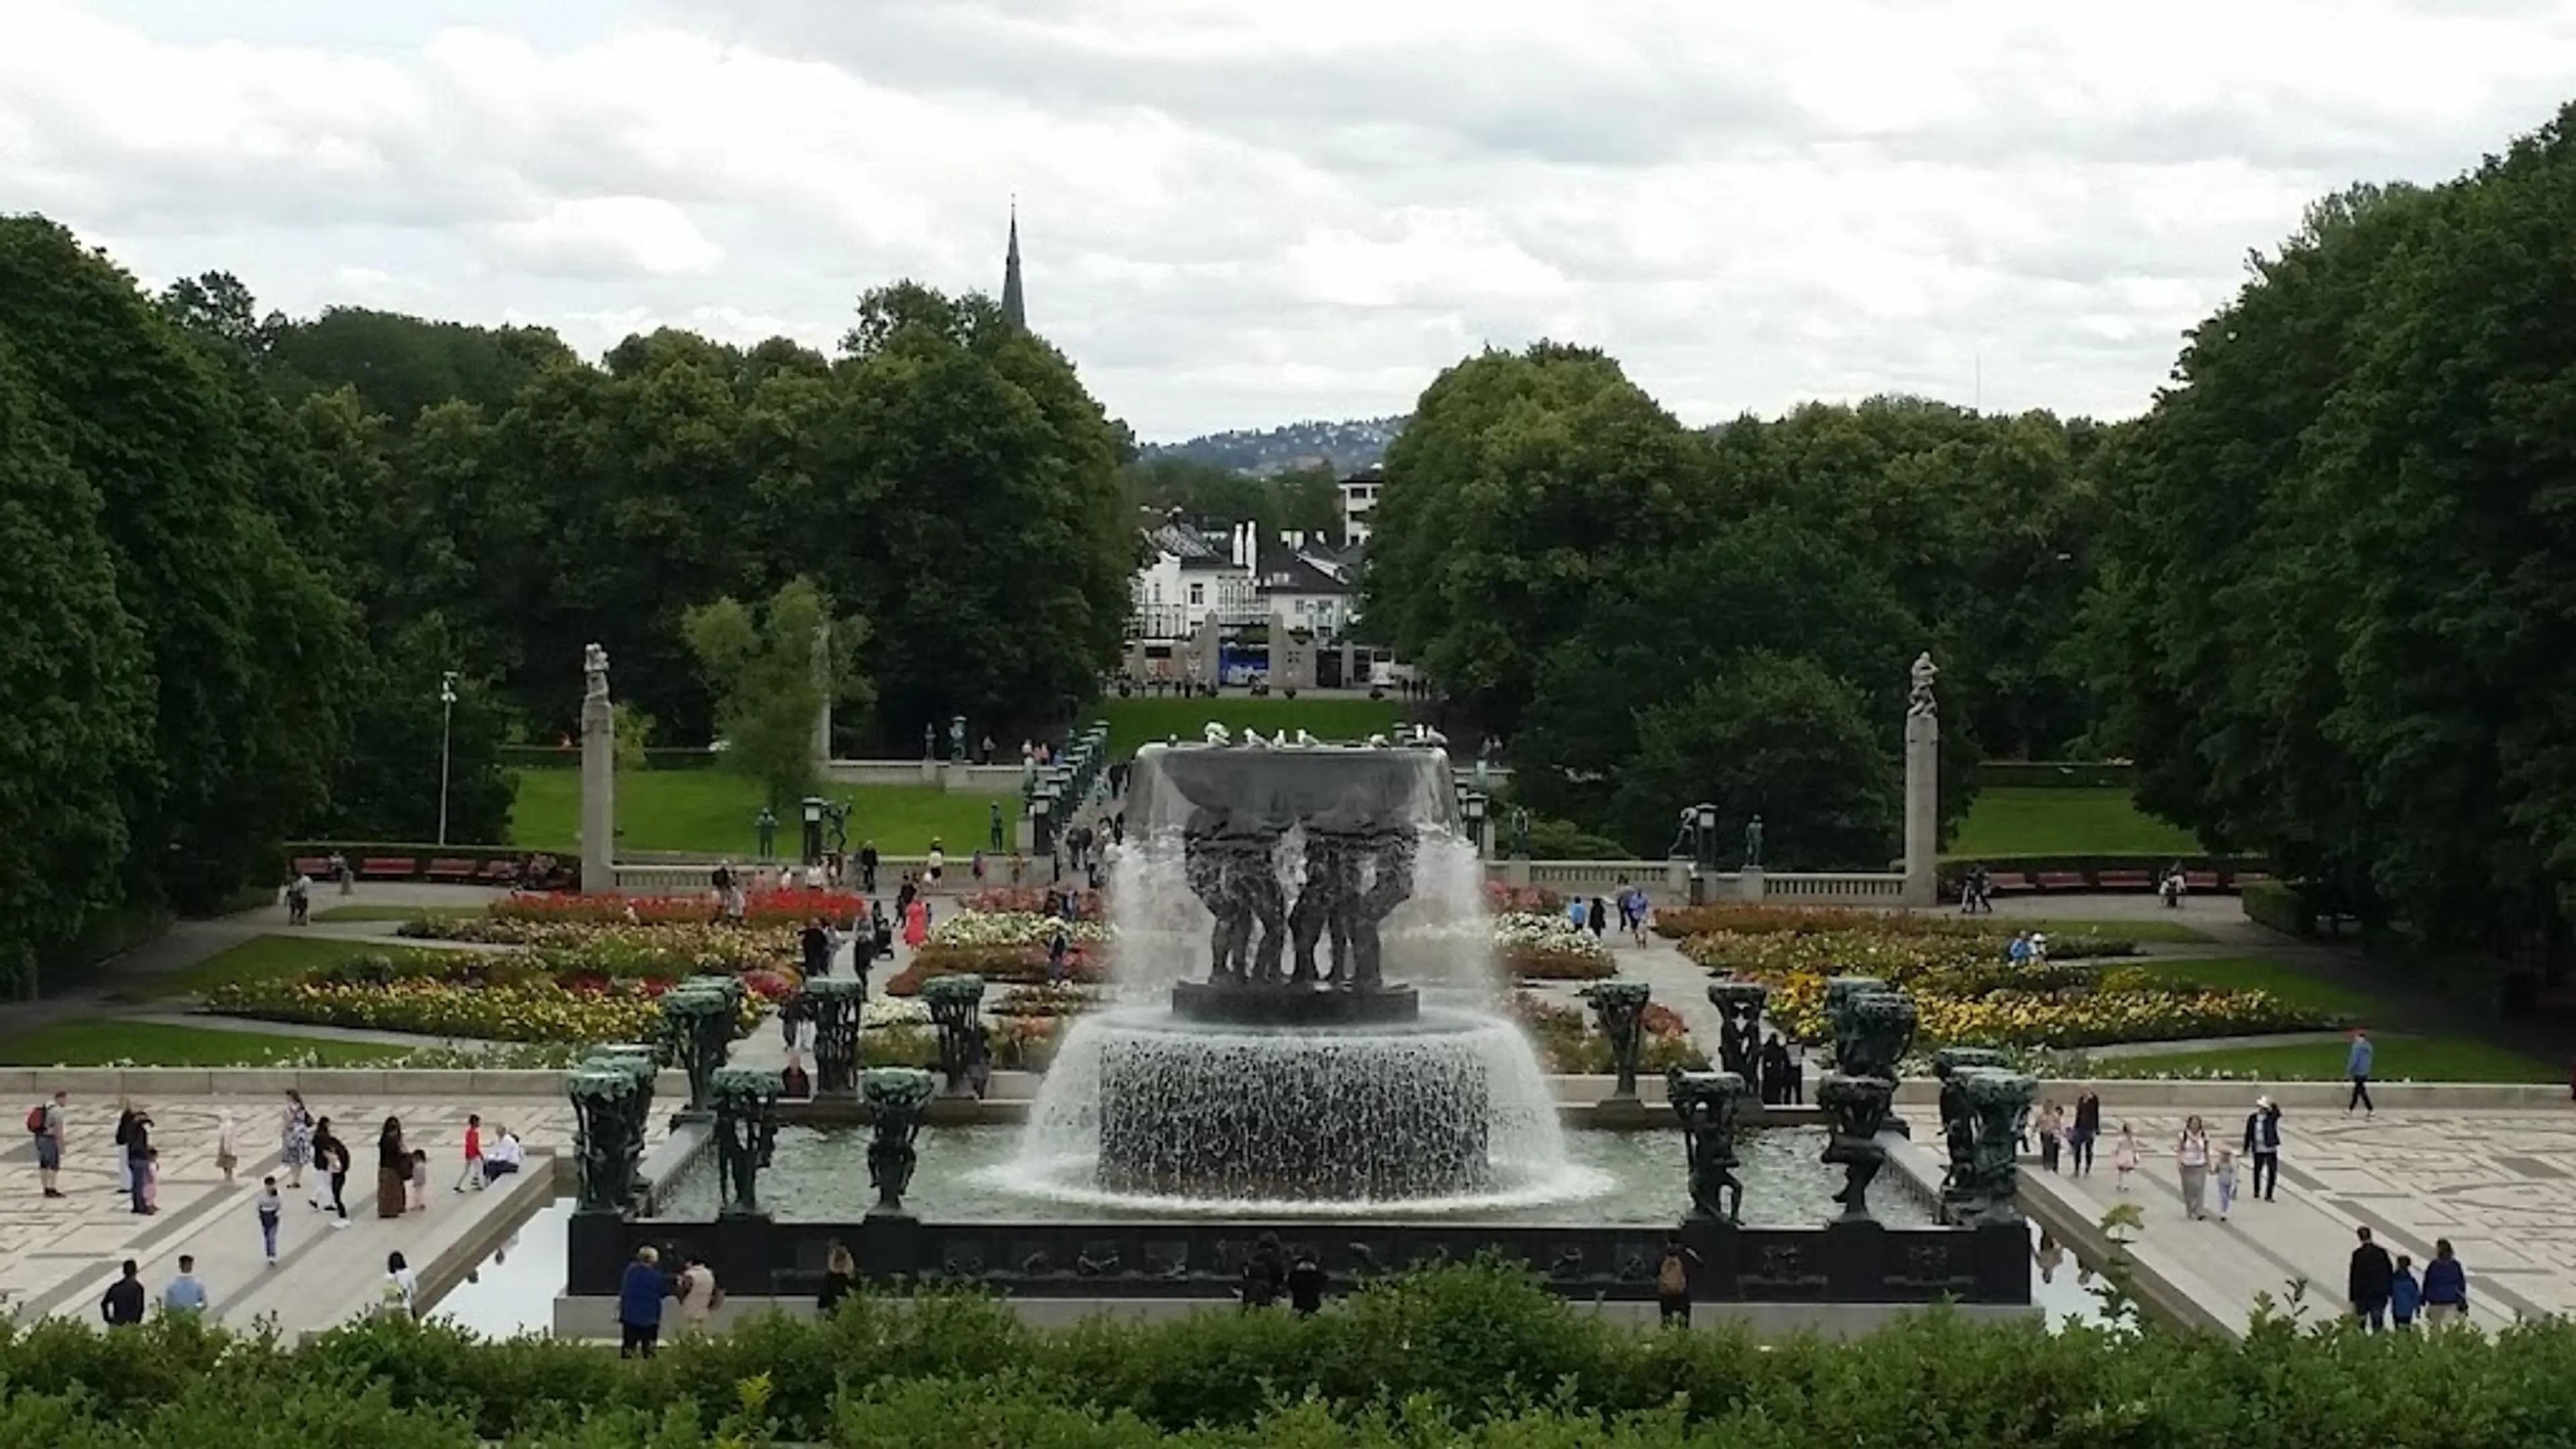 Oslo's Parks